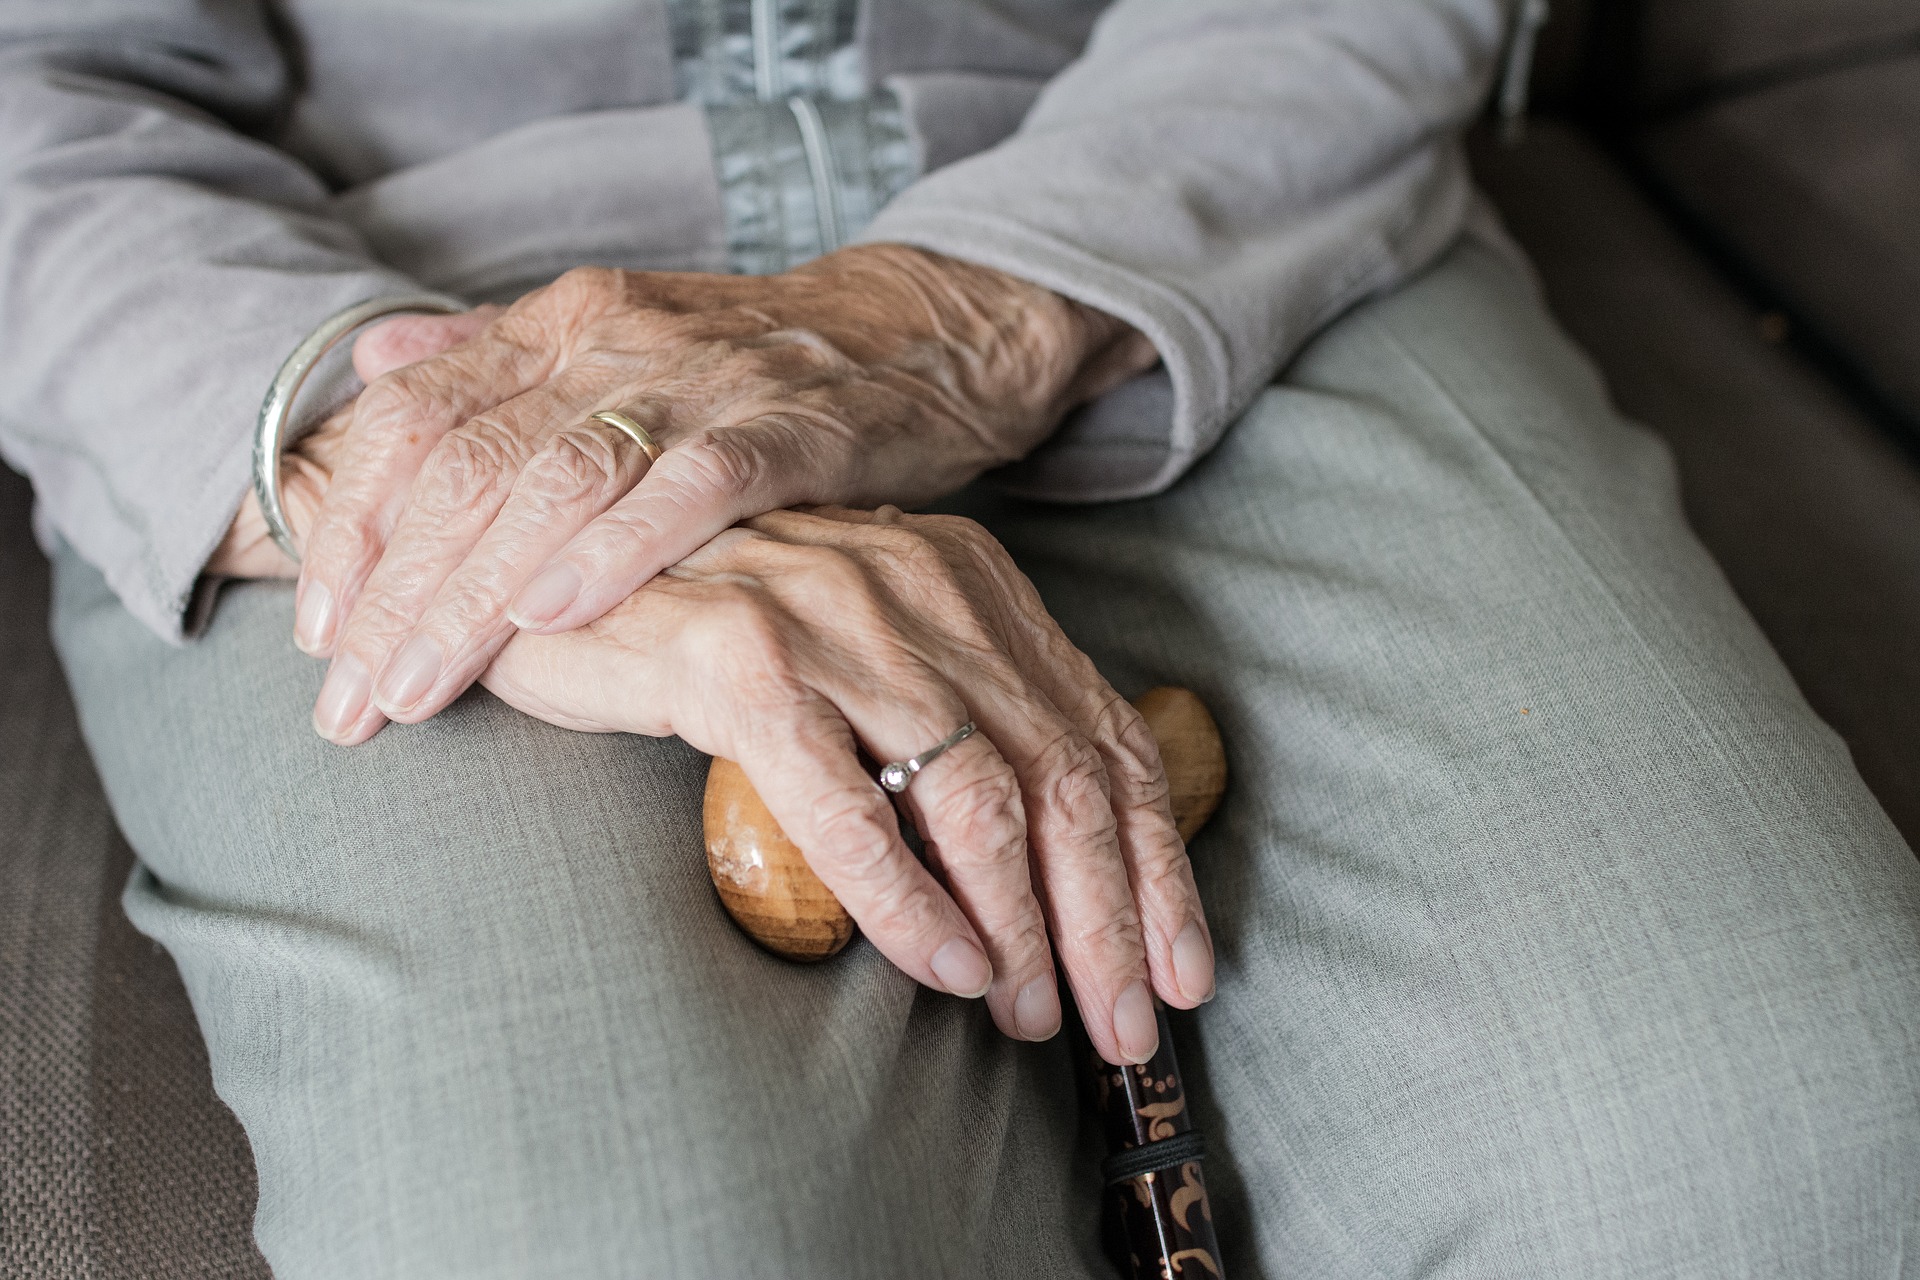 Hands of elderly woman holding cane Image by Sabine van Erp from Pixabay 